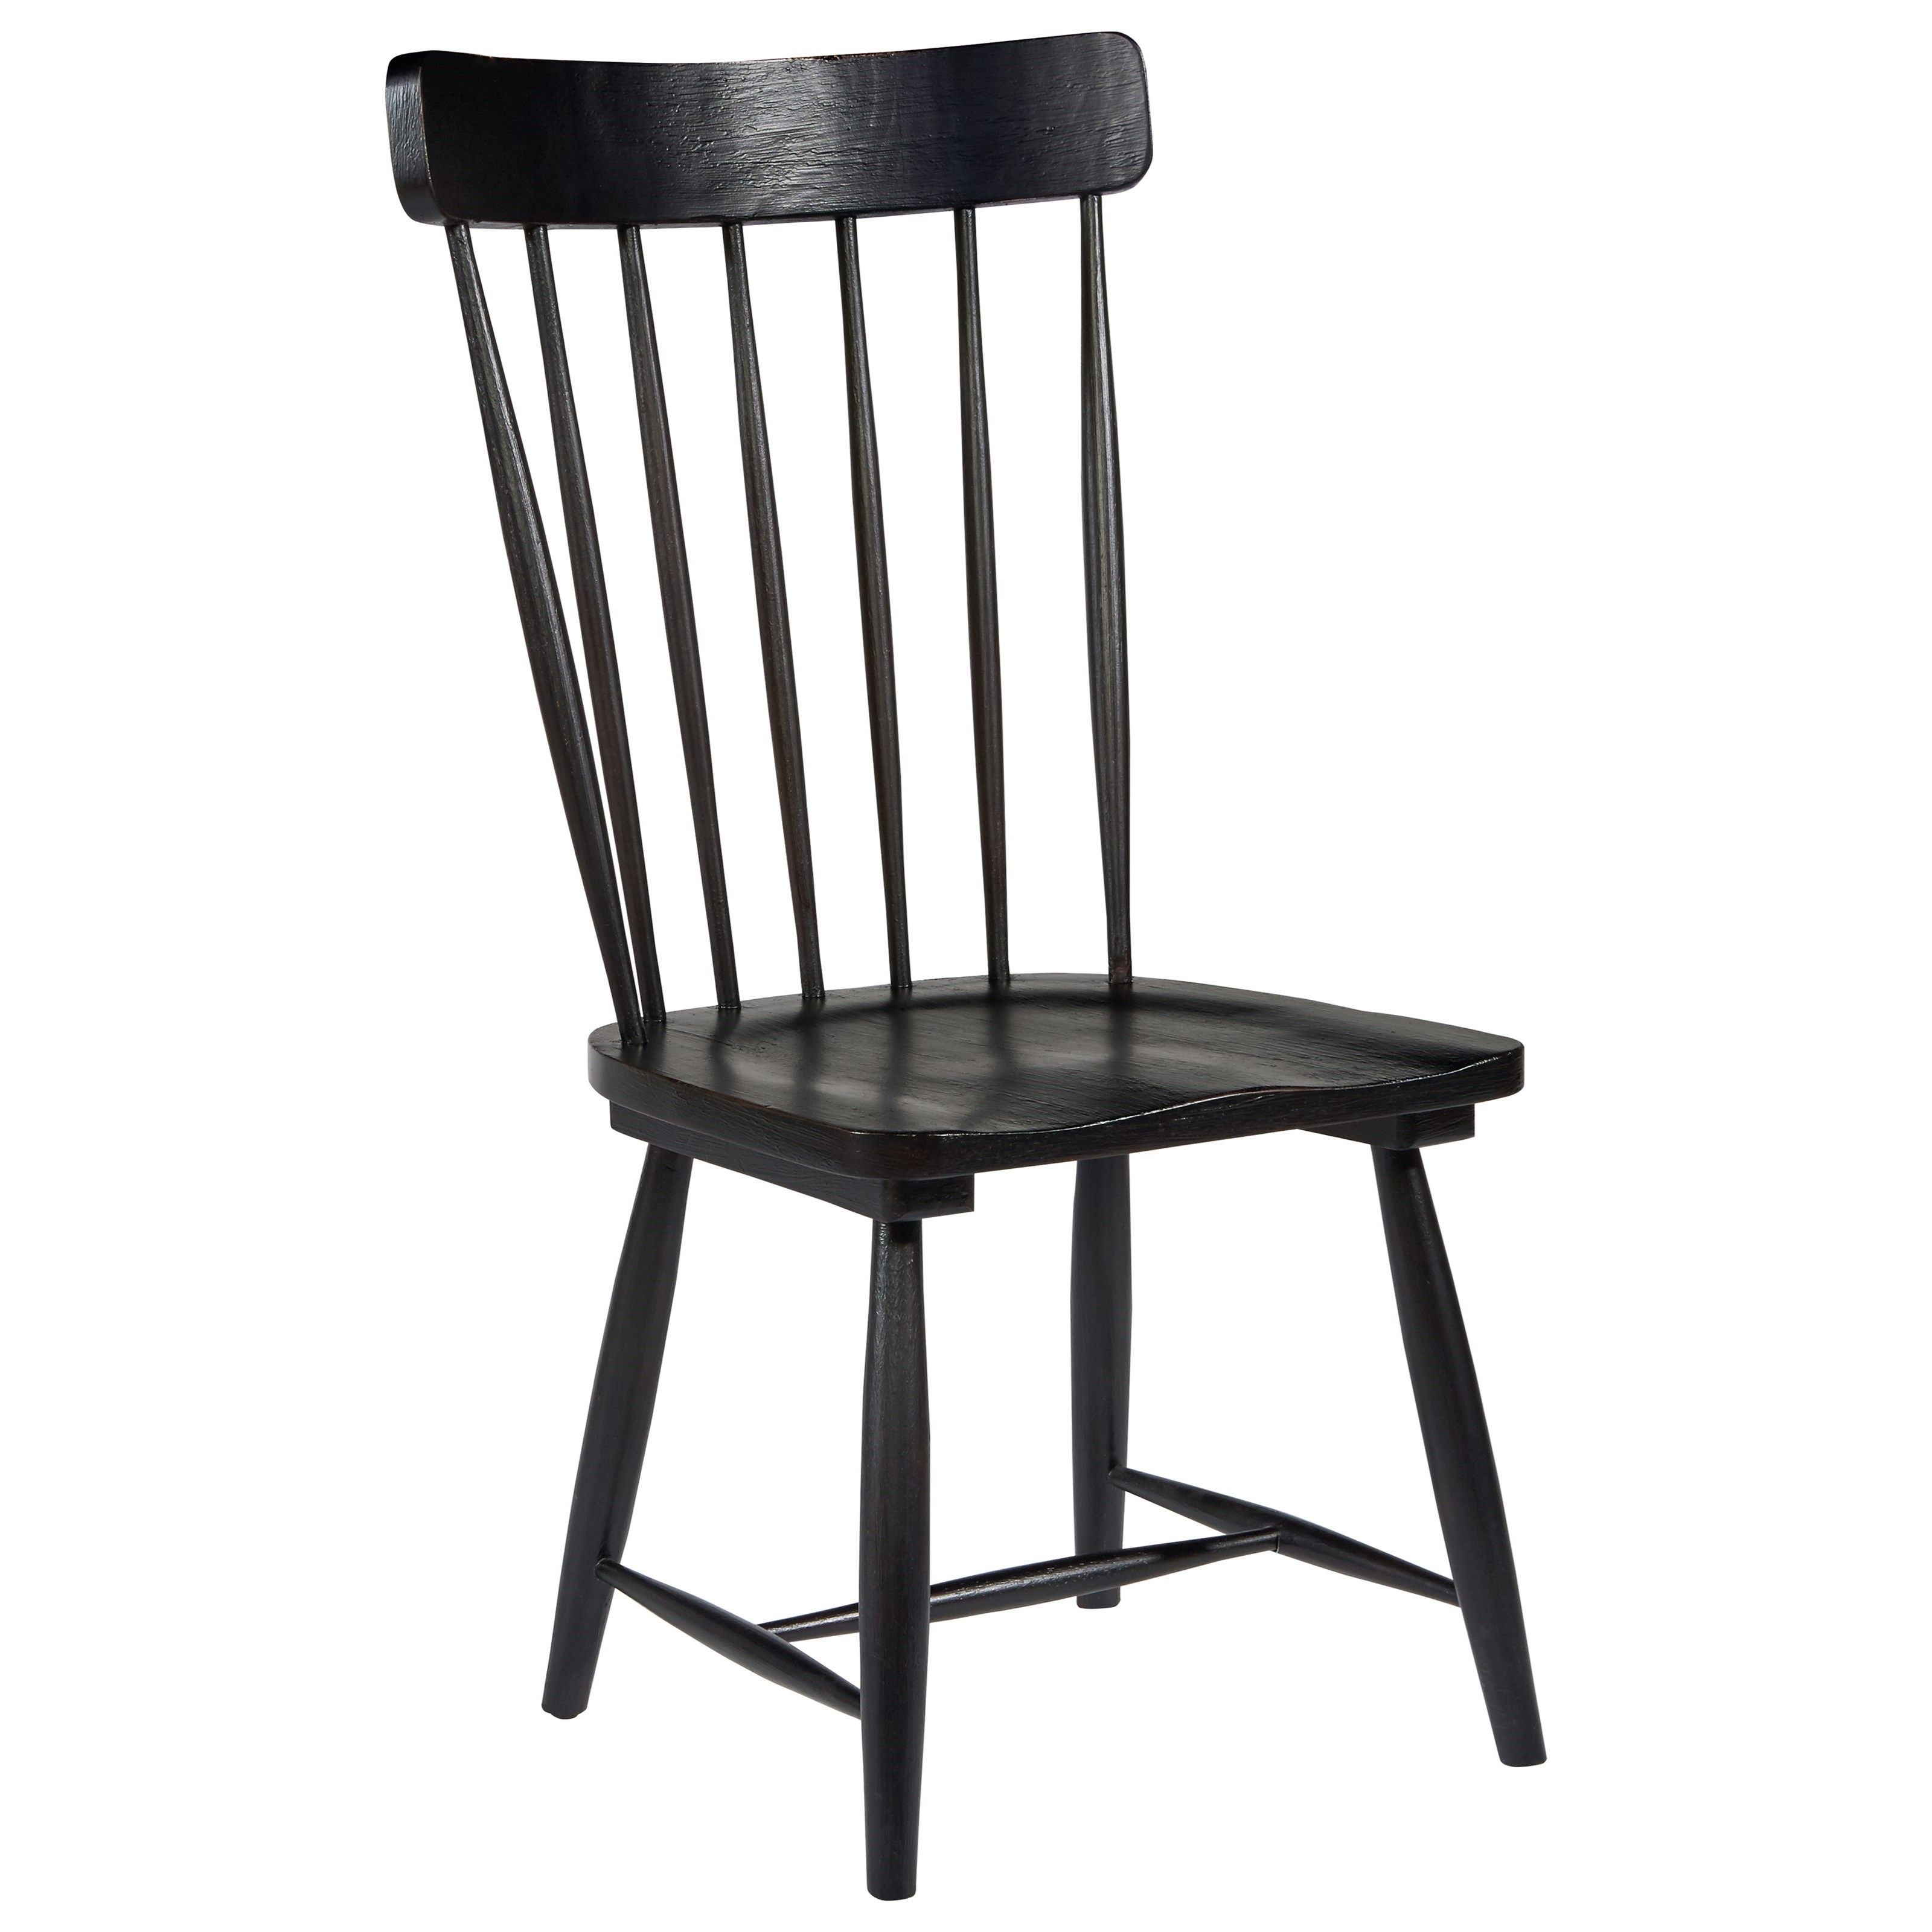 Magnolia Home Hamilton Saddle Side Chairs For Best And Newest Magnolia Homejoanna Gaines Farmhouse Spindle Back Side Chair (View 3 of 20)